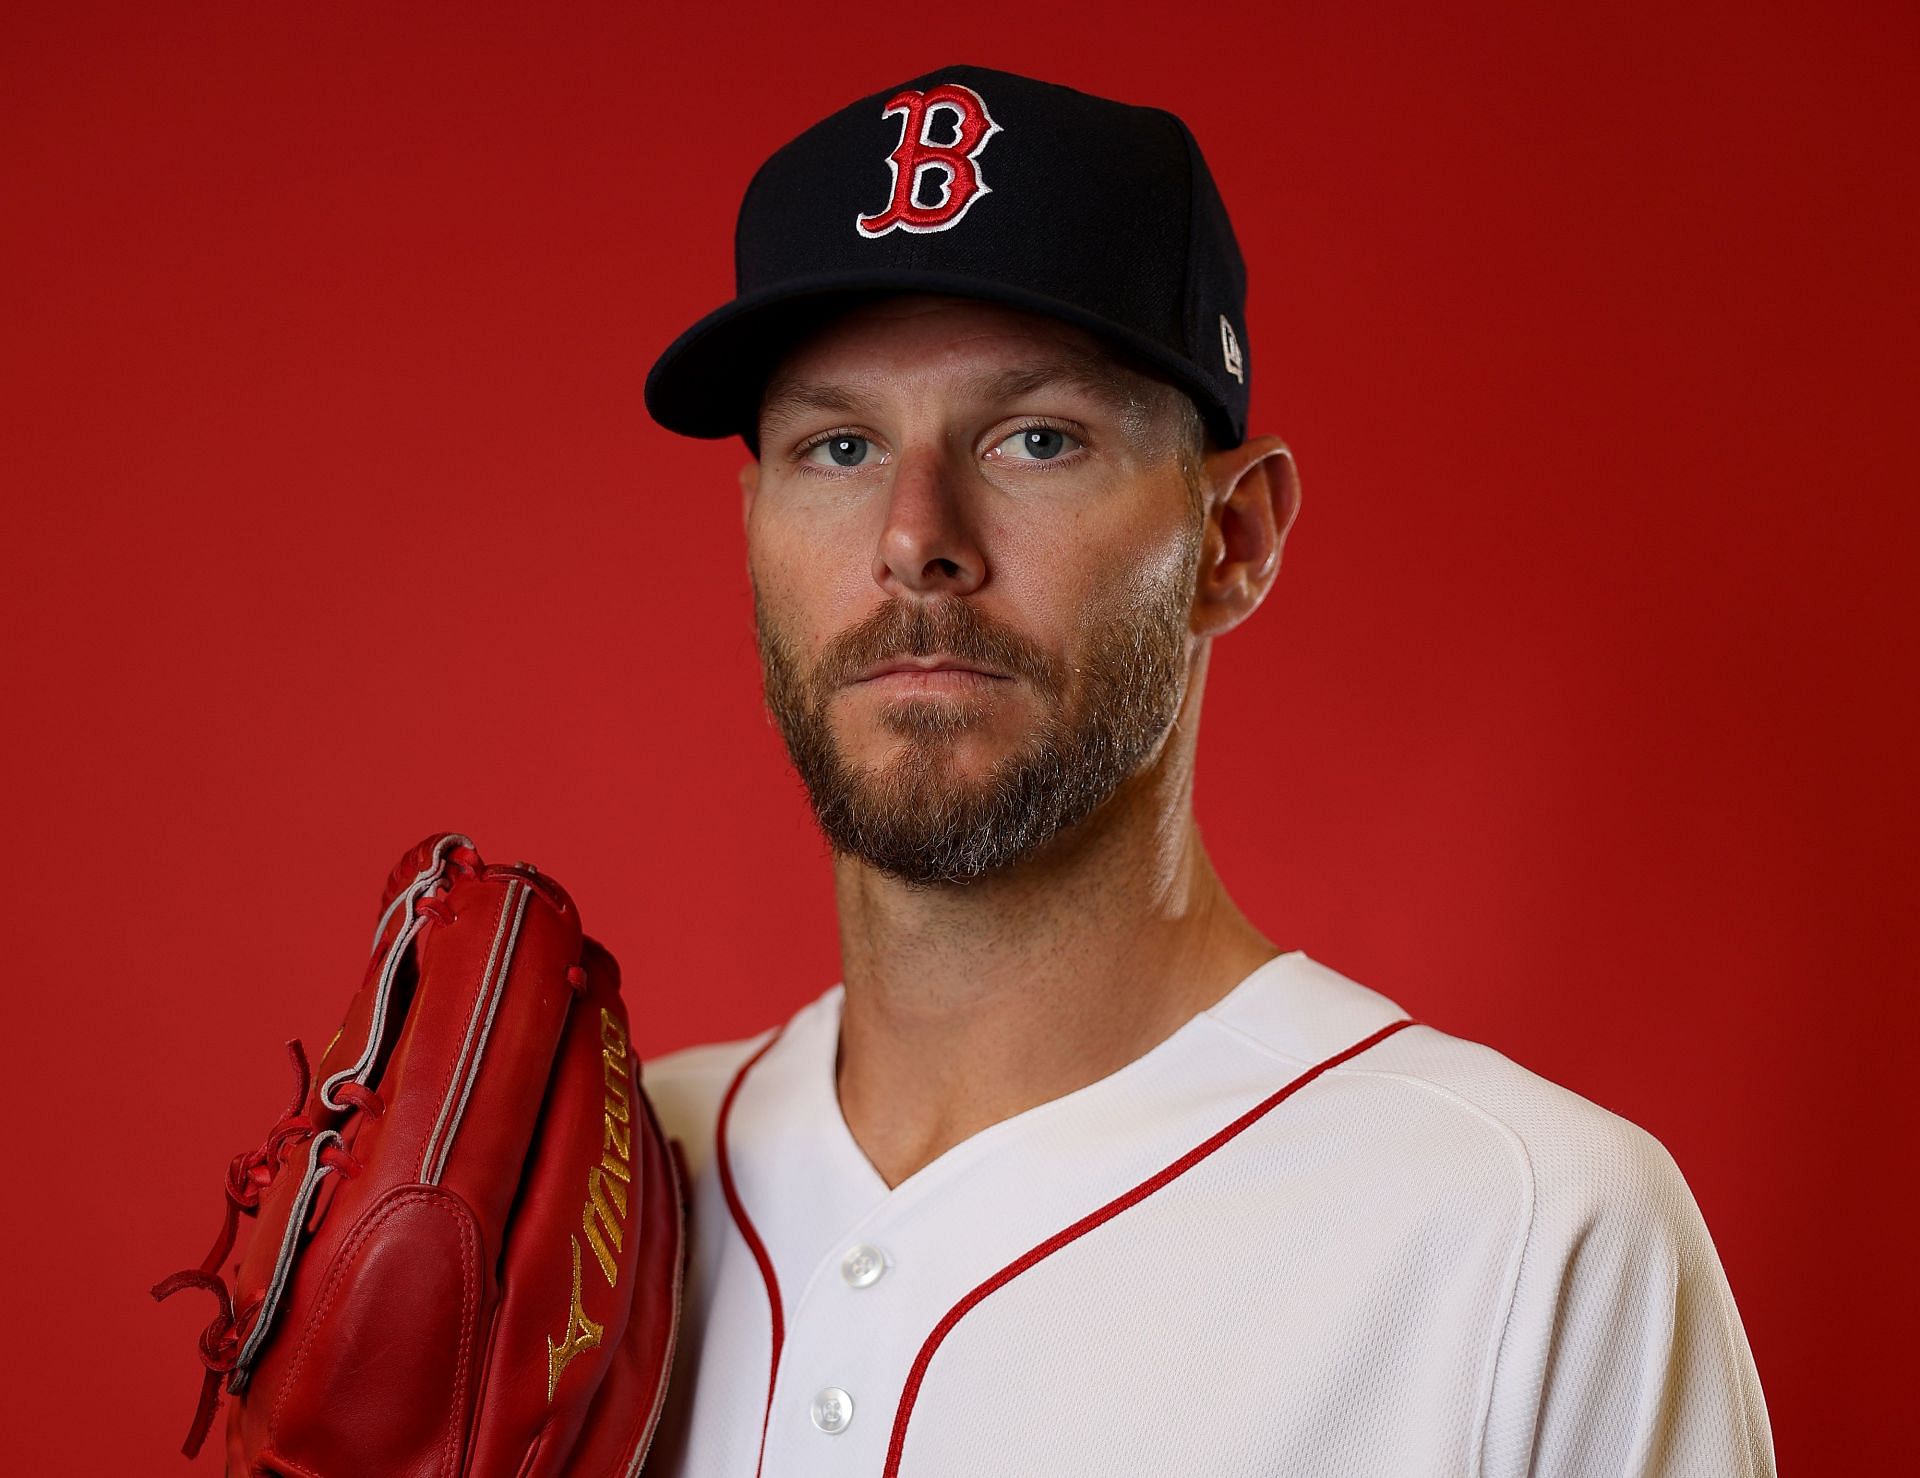 Red Sox: Chris Sale torched by Rays, fans online in latest bad start